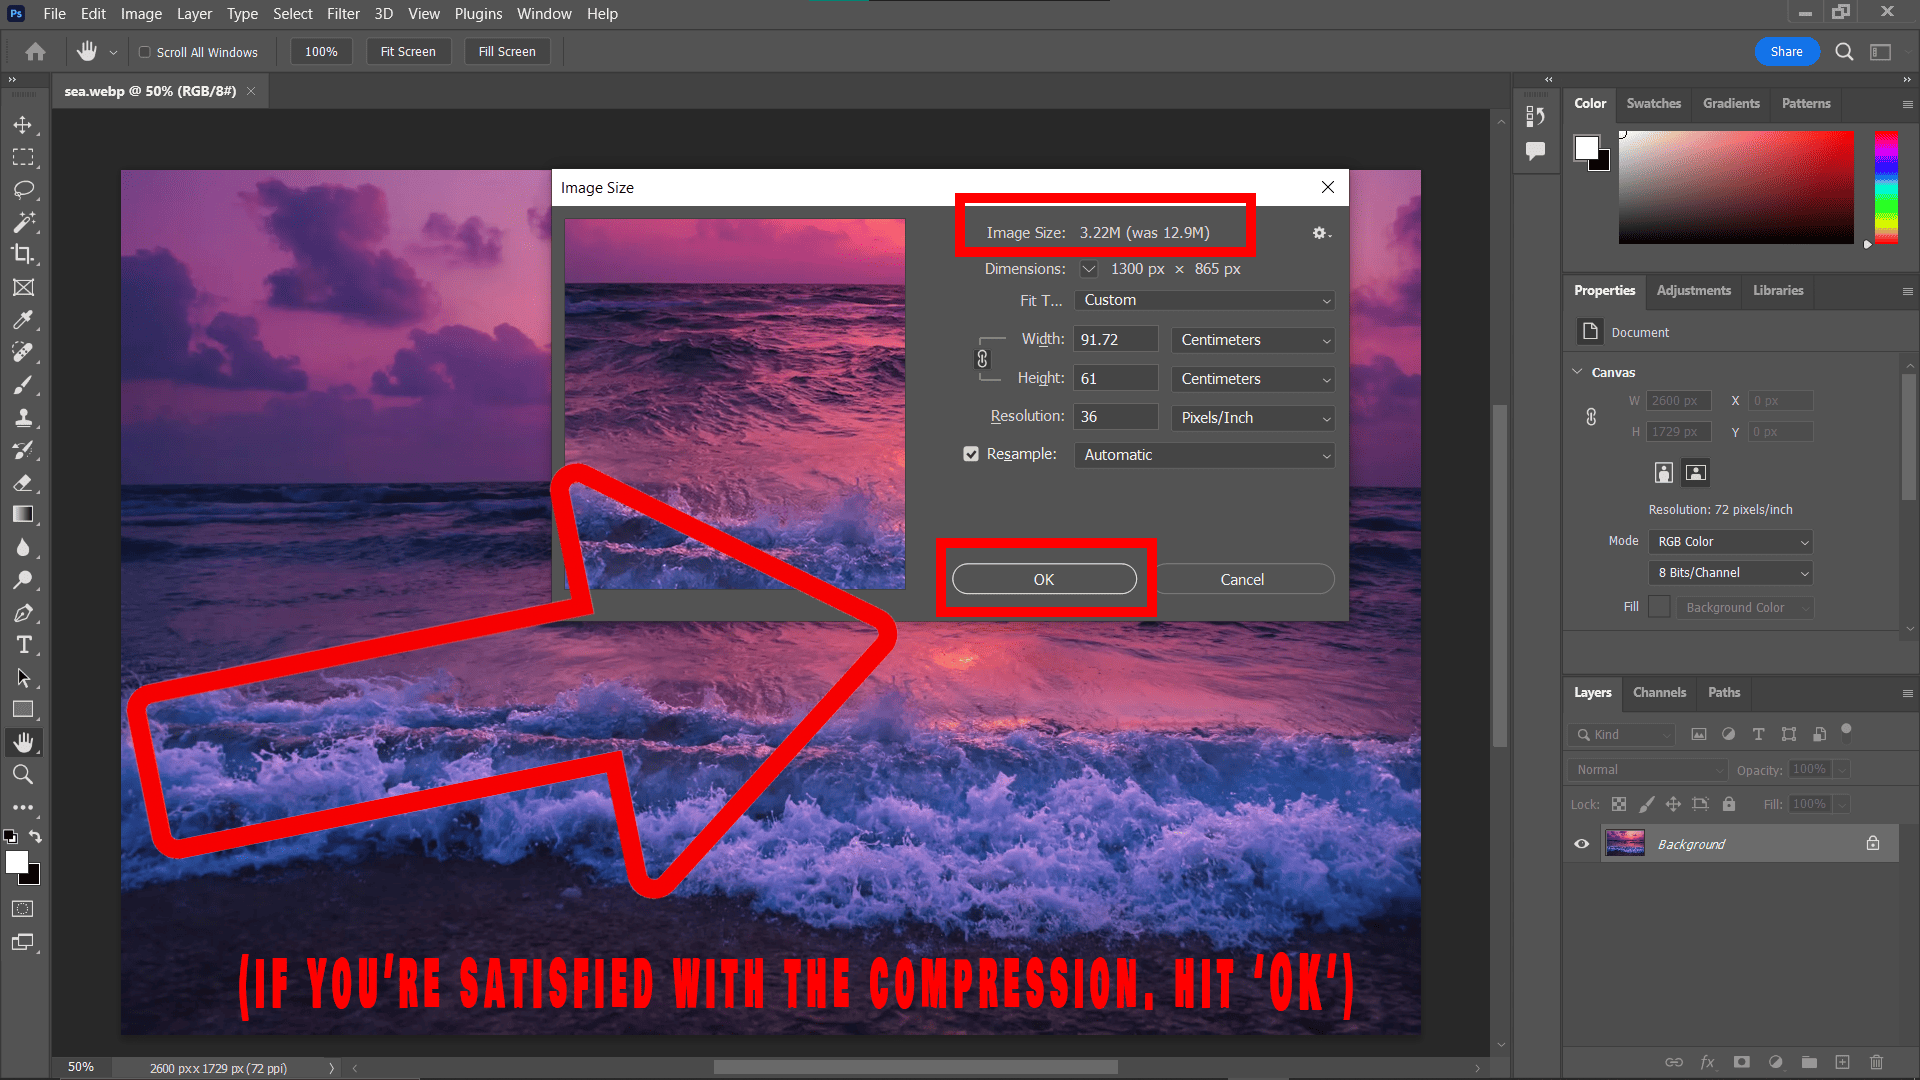 How To Compress WEBP Files Using Adobe Photoshop: Step 3